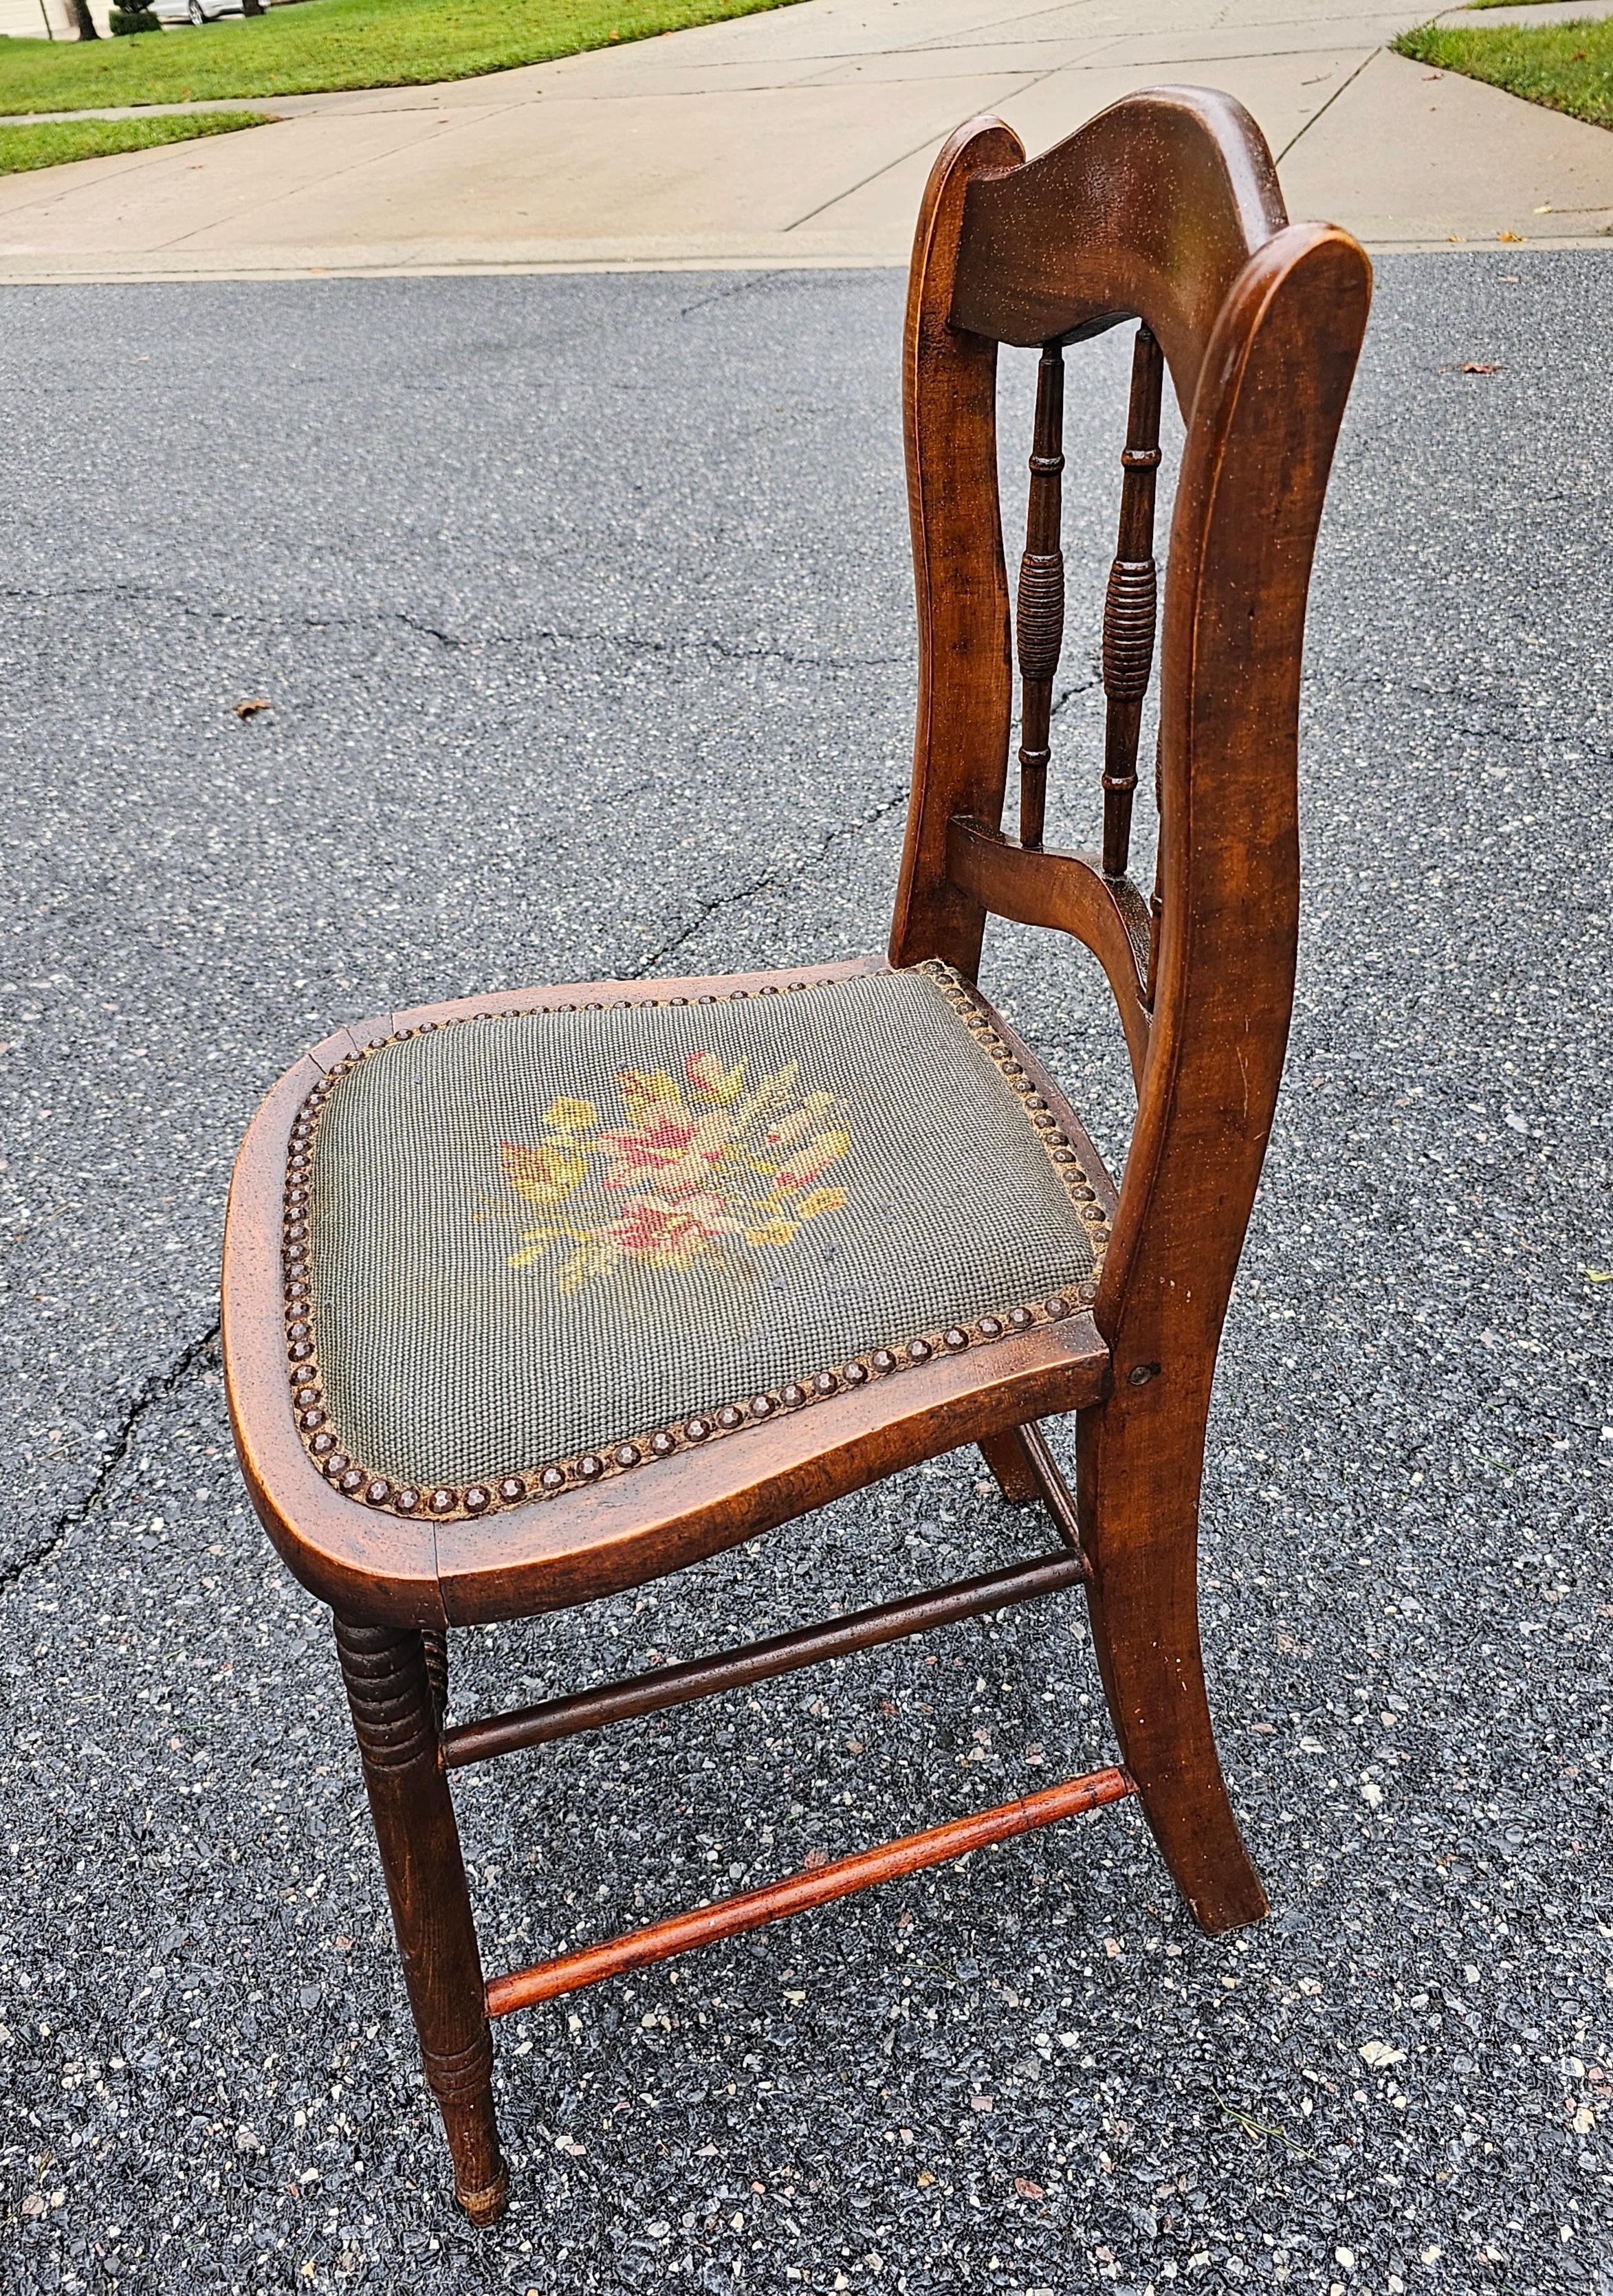 Hand-Crafted 19th Century American Walnut and Needlepoint Upholstered Seat Side Chairs, Pair For Sale